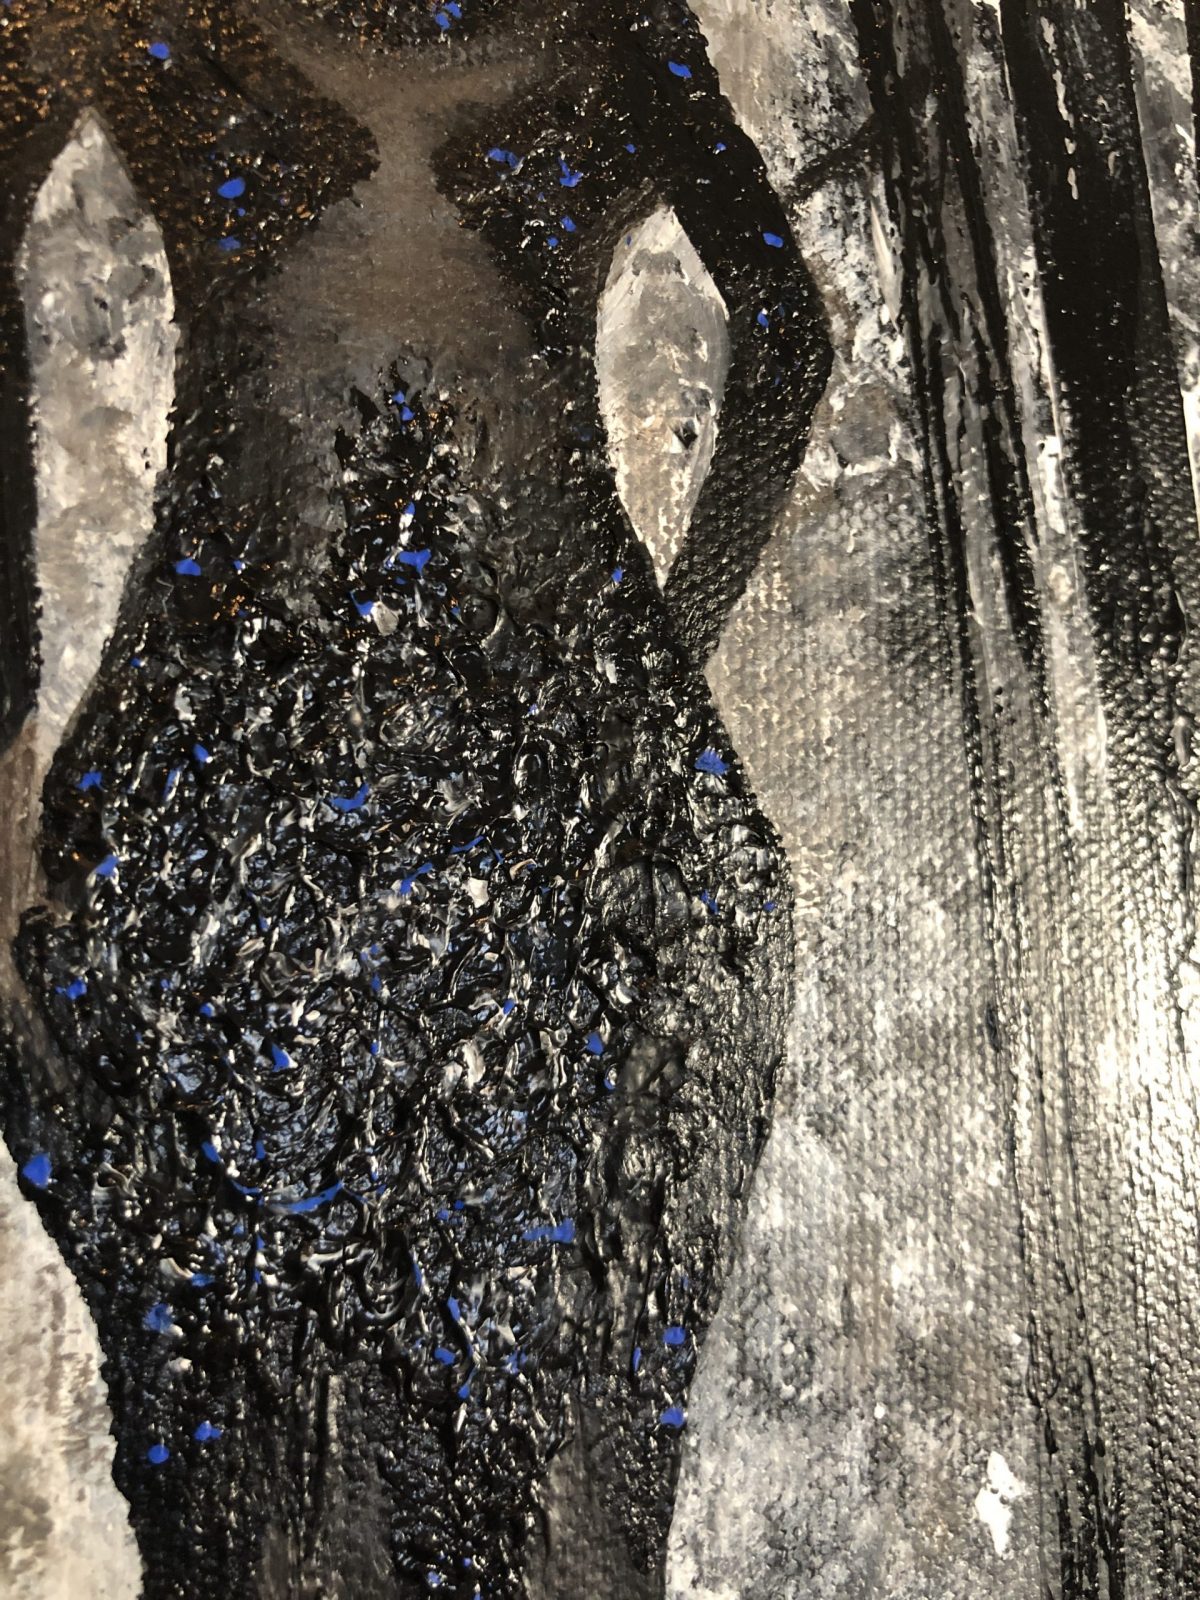 close-up on the splendid dress of the woman - The black widow - acrylic painting made with a knife showing a black widow entering a forest in black and white